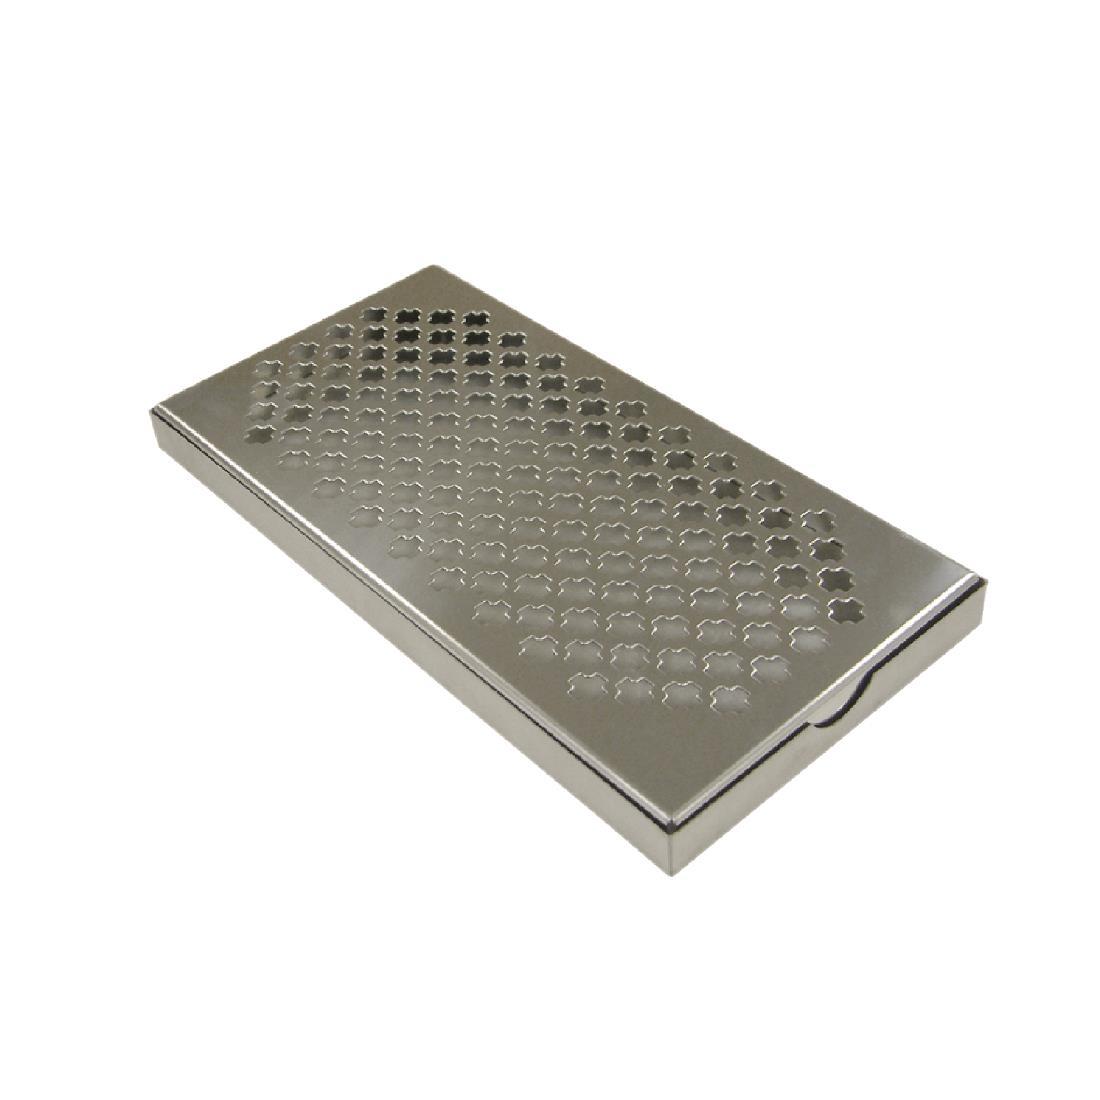 Beaumont Stainless Steel Drip Tray 300 x 150mm - D825  - 1